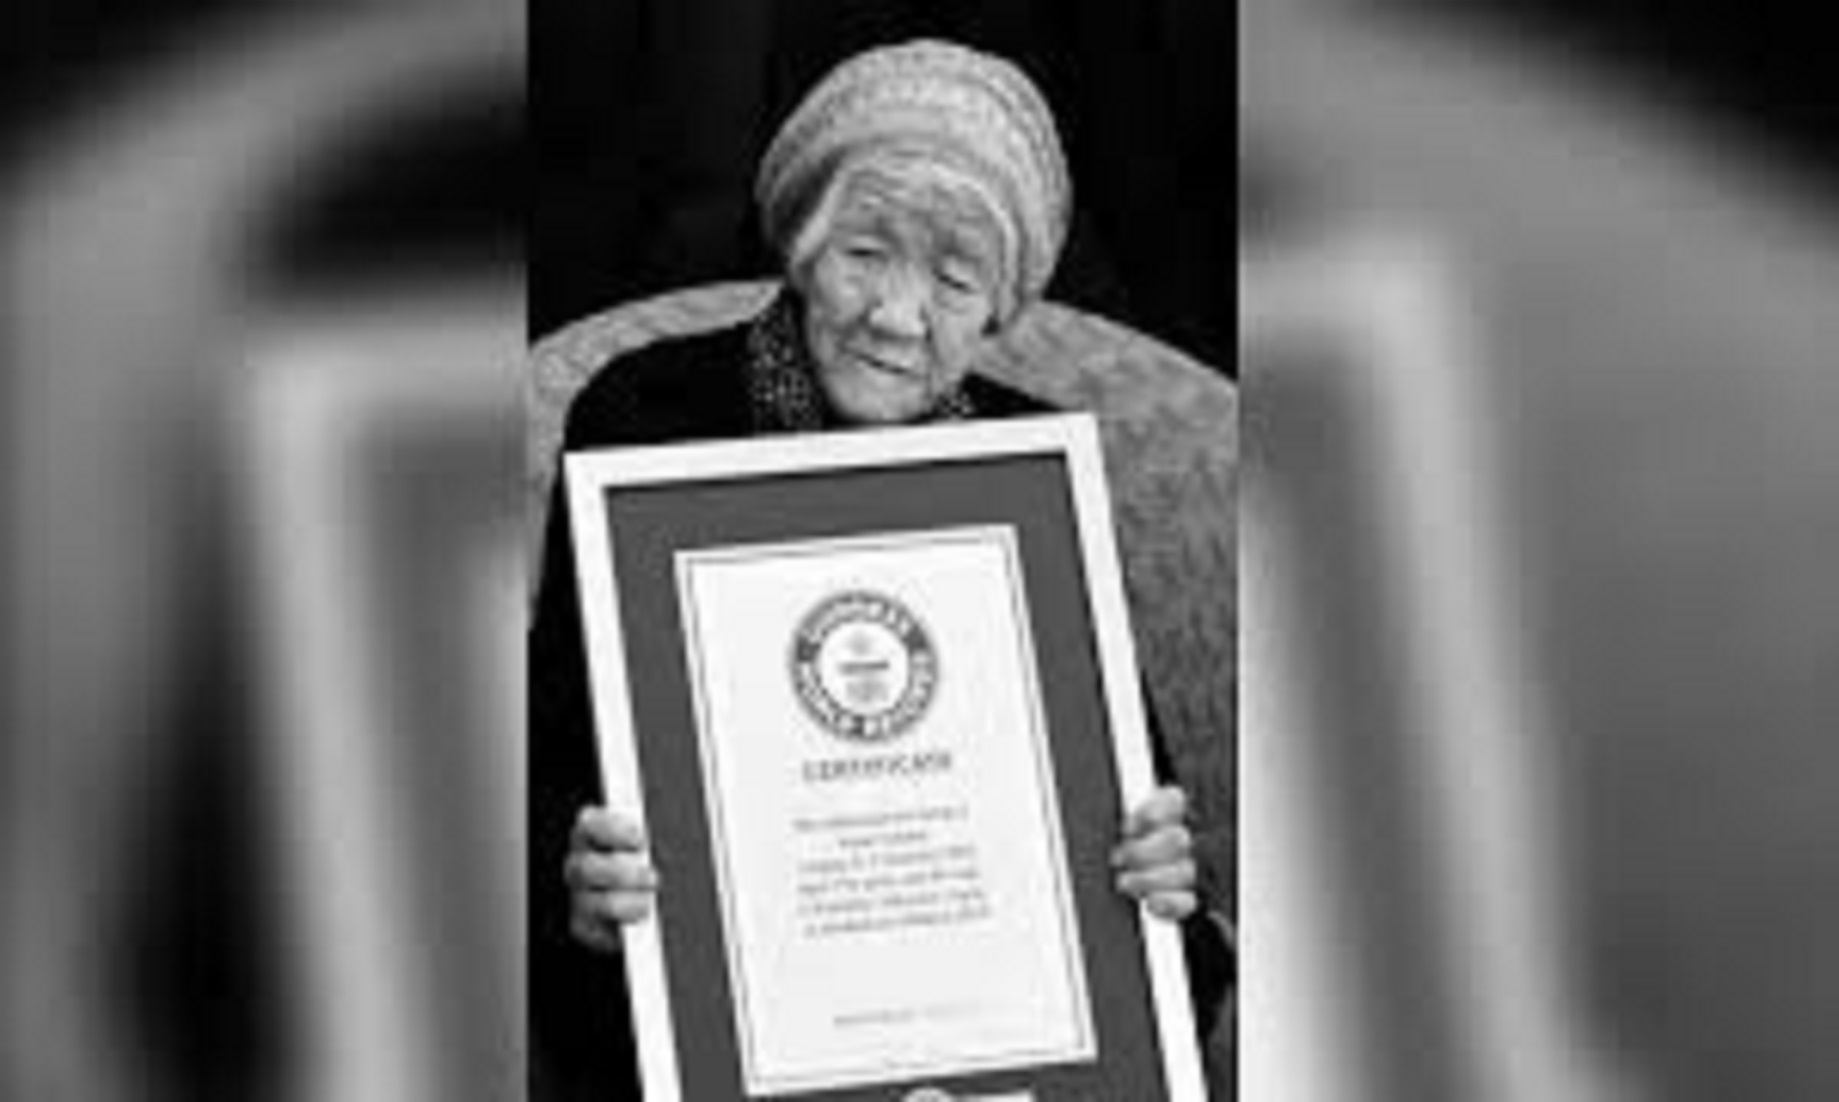 World’s Oldest Person Dies At 119 In Japan